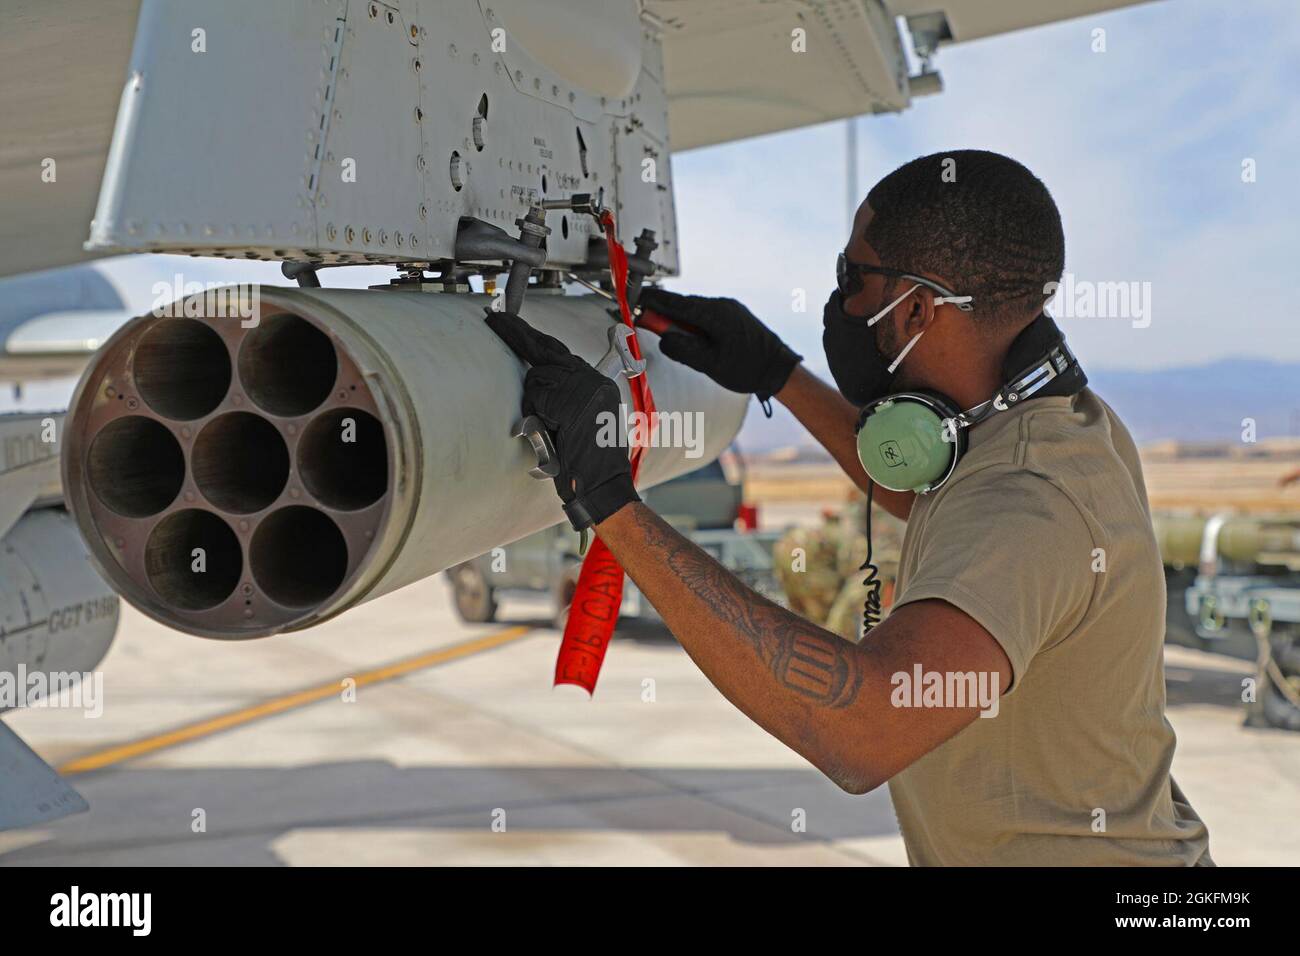 Master Sgt. Joe Mack, from the 127th Wing Maintenance Group, loads rockets on to an A-10 Thunderbolt II at Nellis Air Force Base, Nev., April 9, 2021. Airmen from the 127th Wing are participating in Green Flag, a Joint Force combat exercise, to ensure maximum combat readiness. Stock Photo